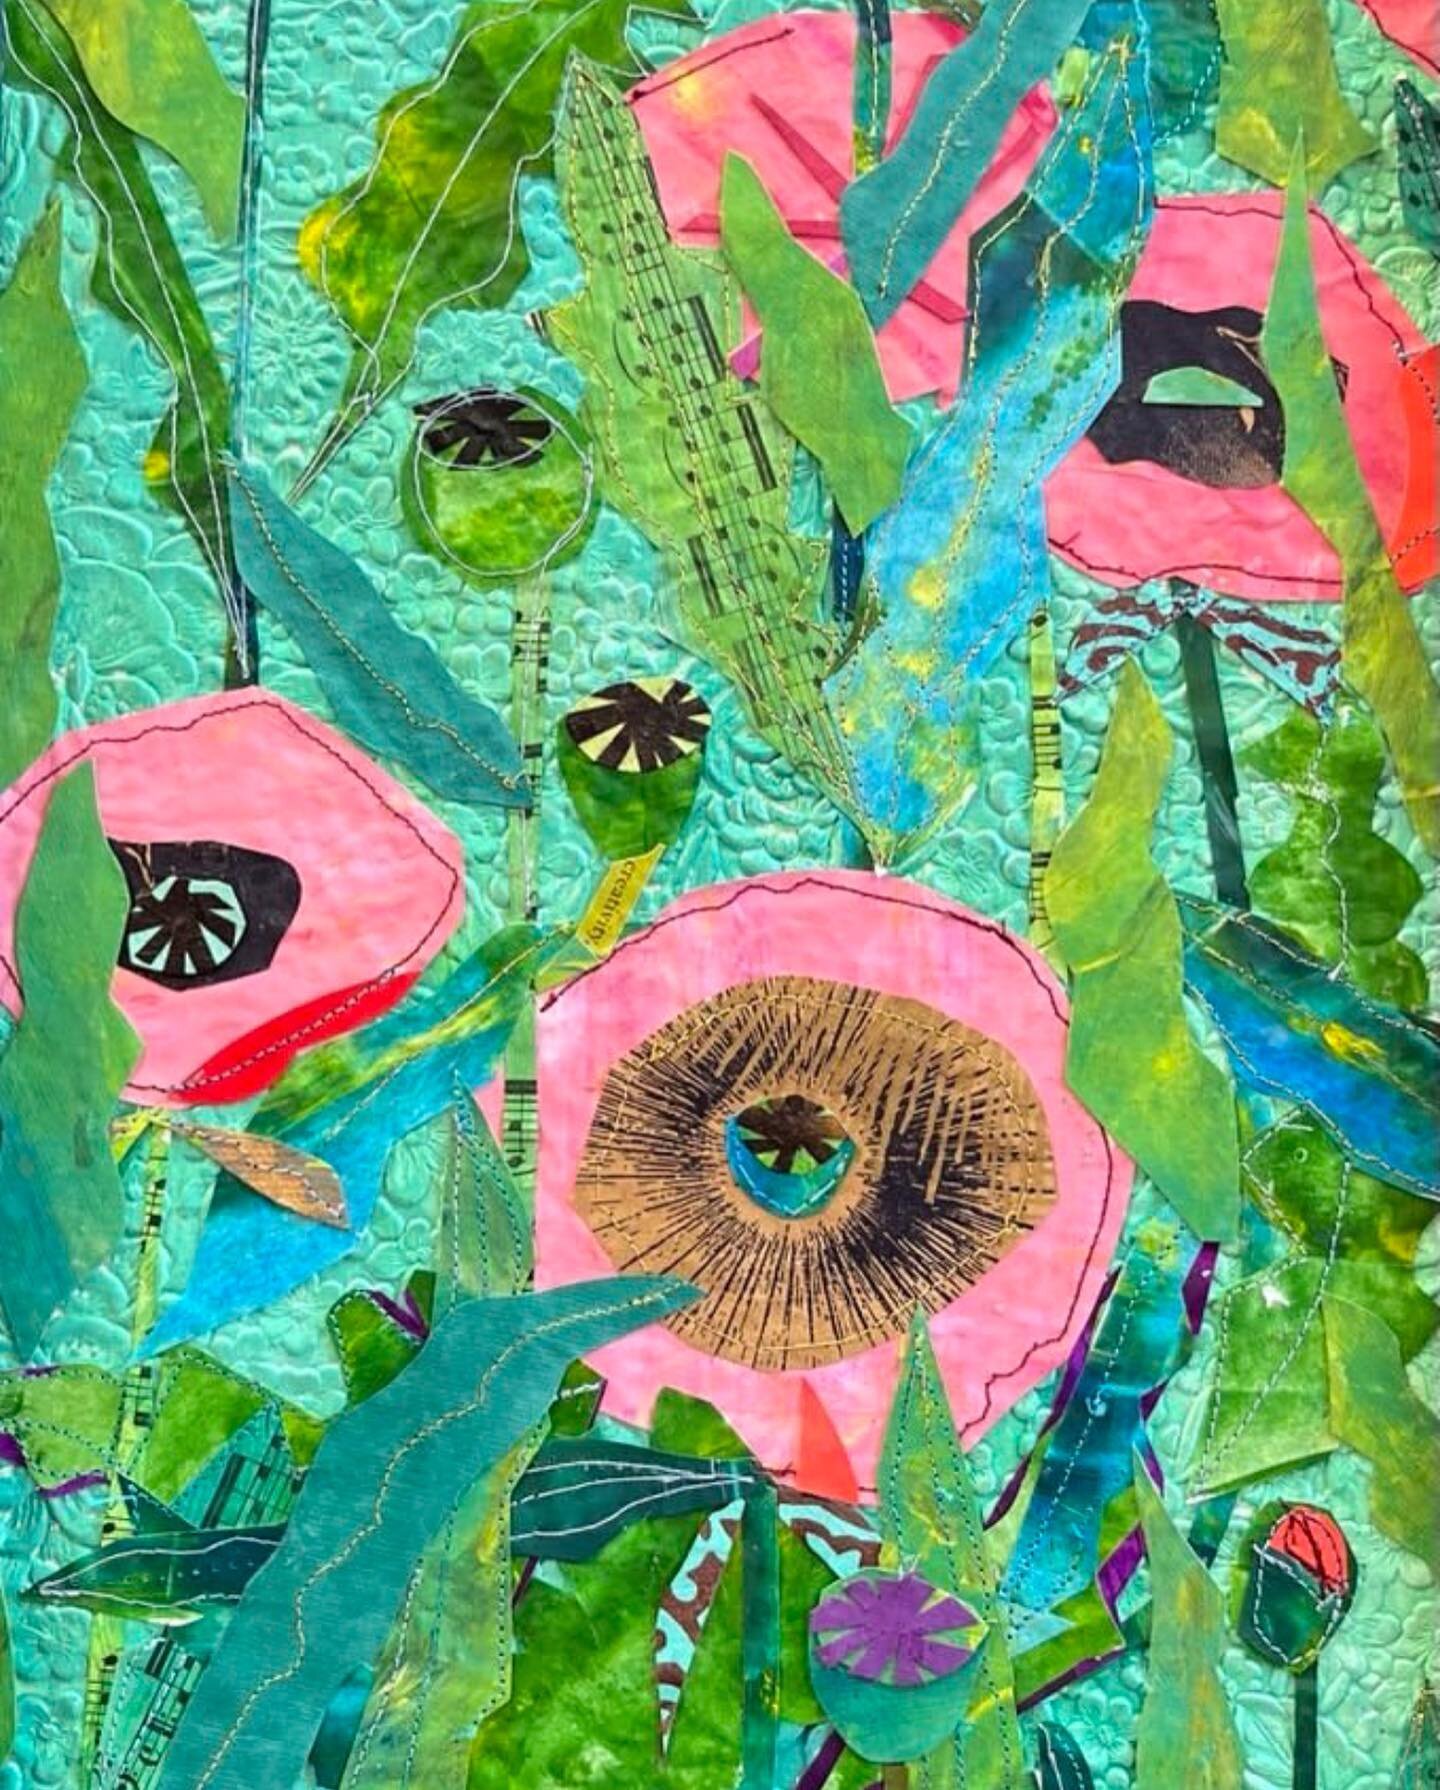 Finding Hope in the Garden (detail), paper collage 9.5&rdquo; x 19.5&rdquo; by our member Kerry Stone @famstone5 
~Swipe to see the full art work framed~

~
#wmass #papercollage #paperartist #flowerwallart #pioneervalley #newenglandart #madeinmassach